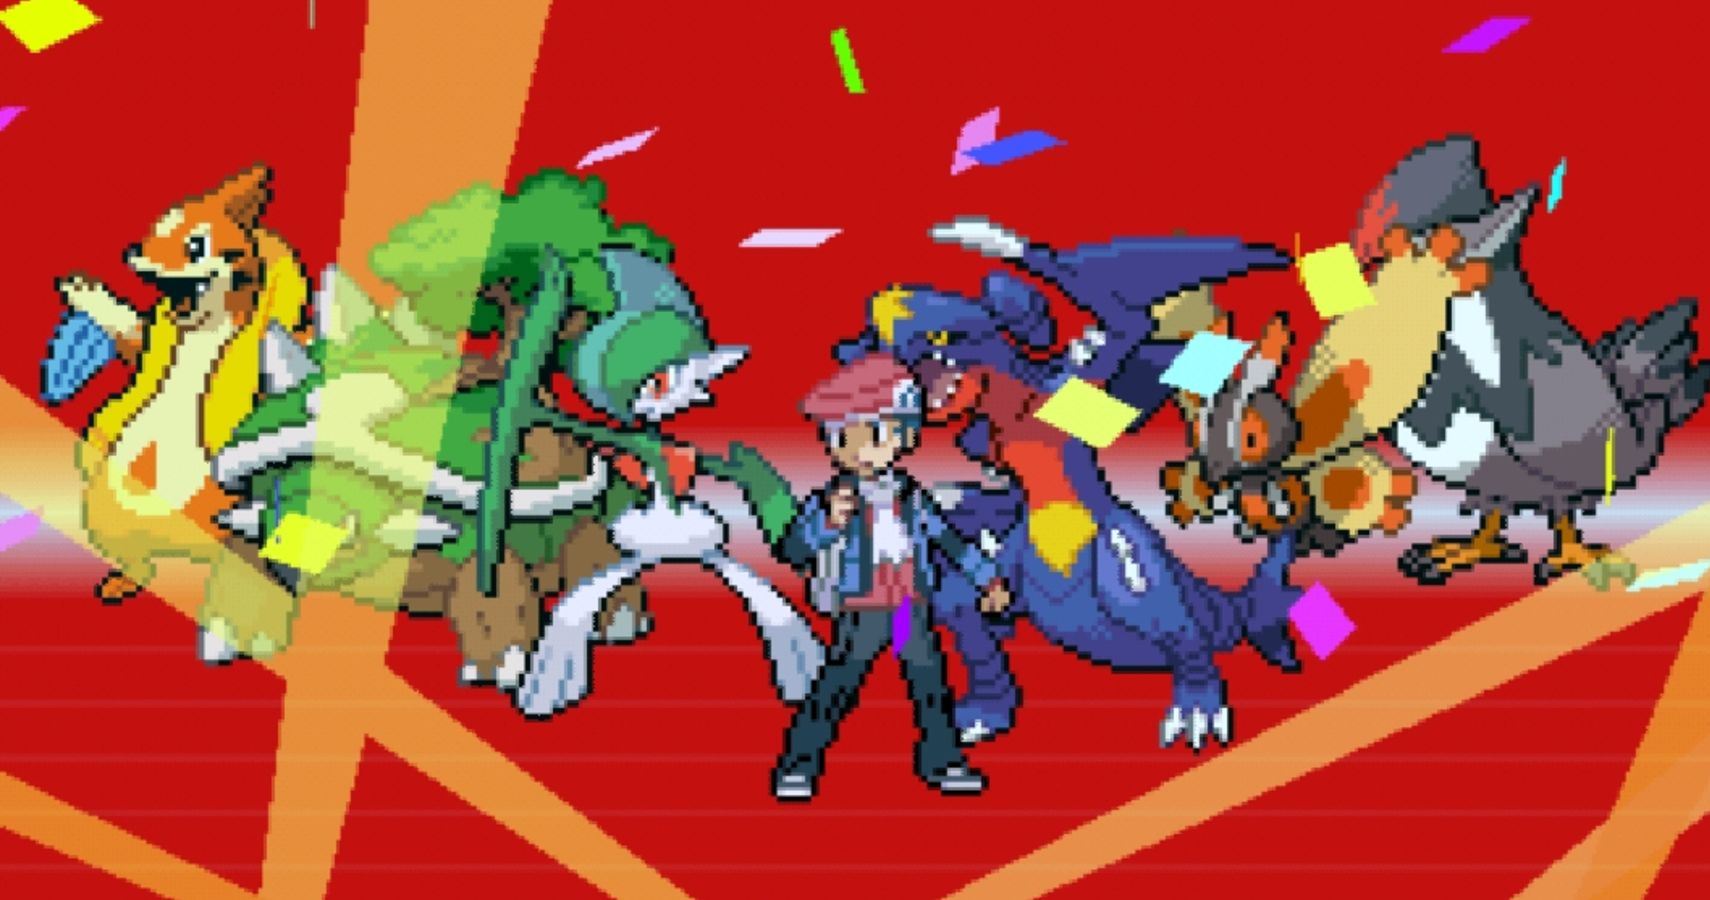 Trainer with their team of Pokemon